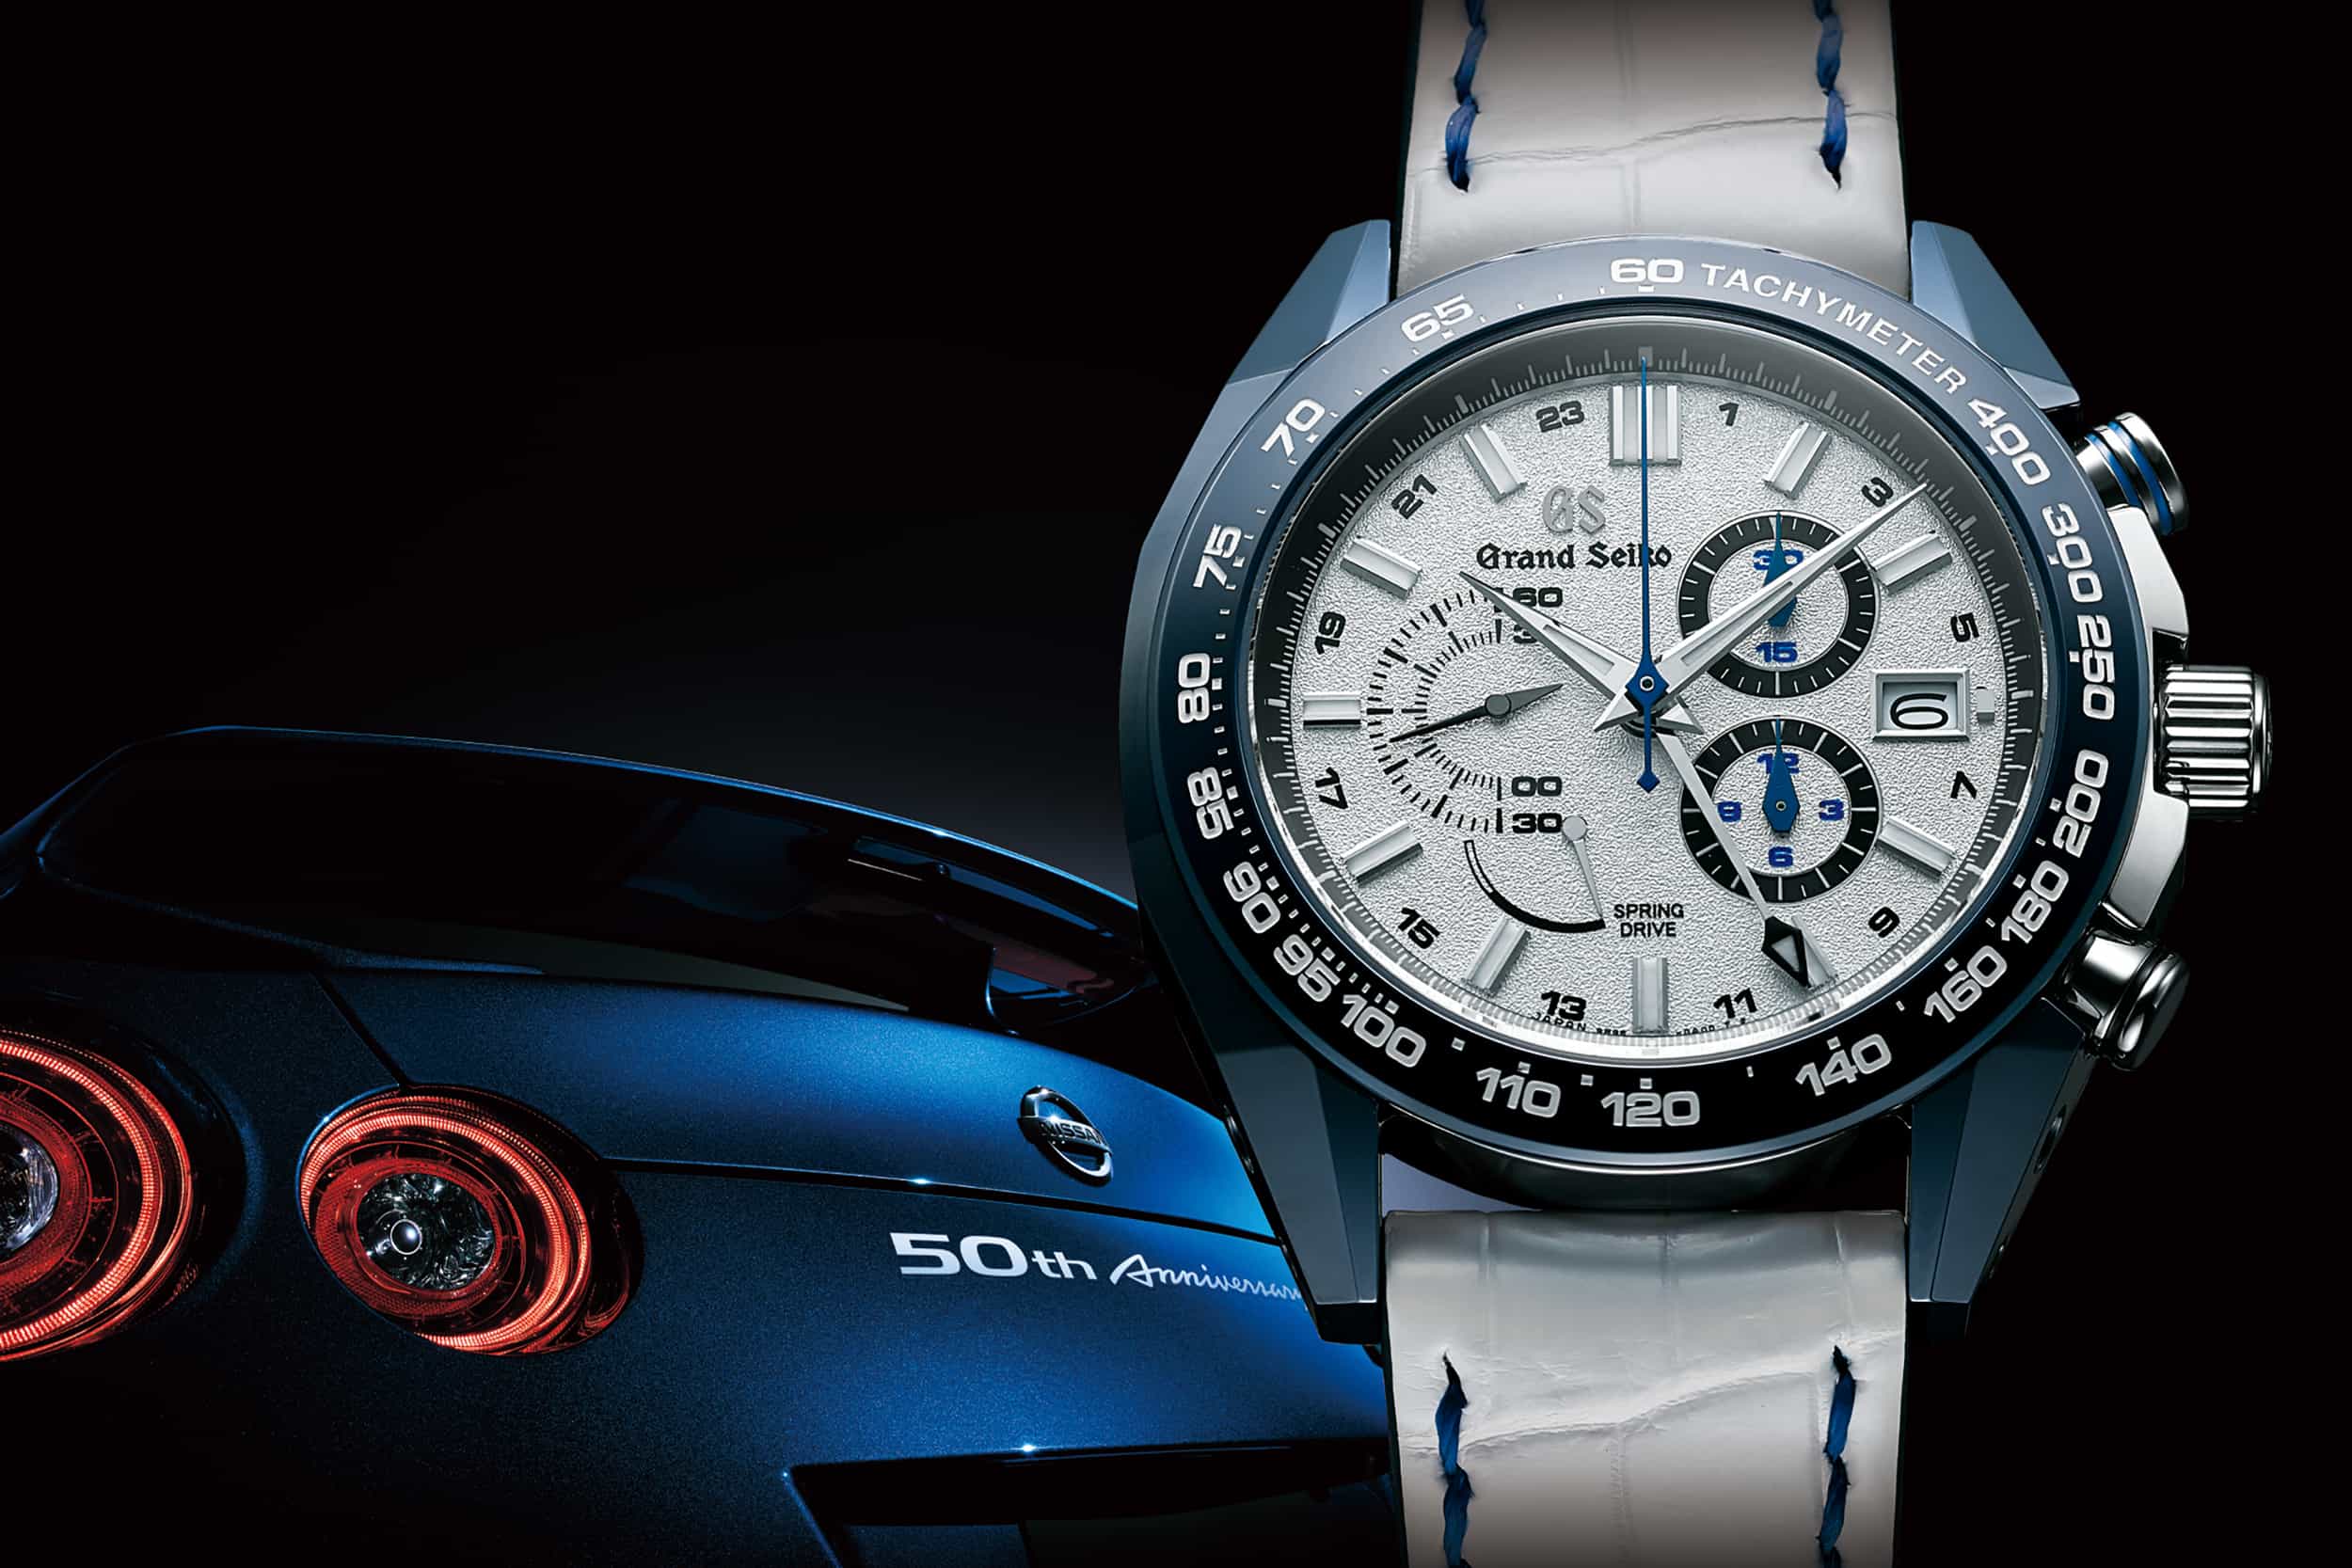 Introducing the Grand Seiko Spring Drive 20th & Nissan GT-R 50th Anniversary Limited Edition Ref. SBGC229